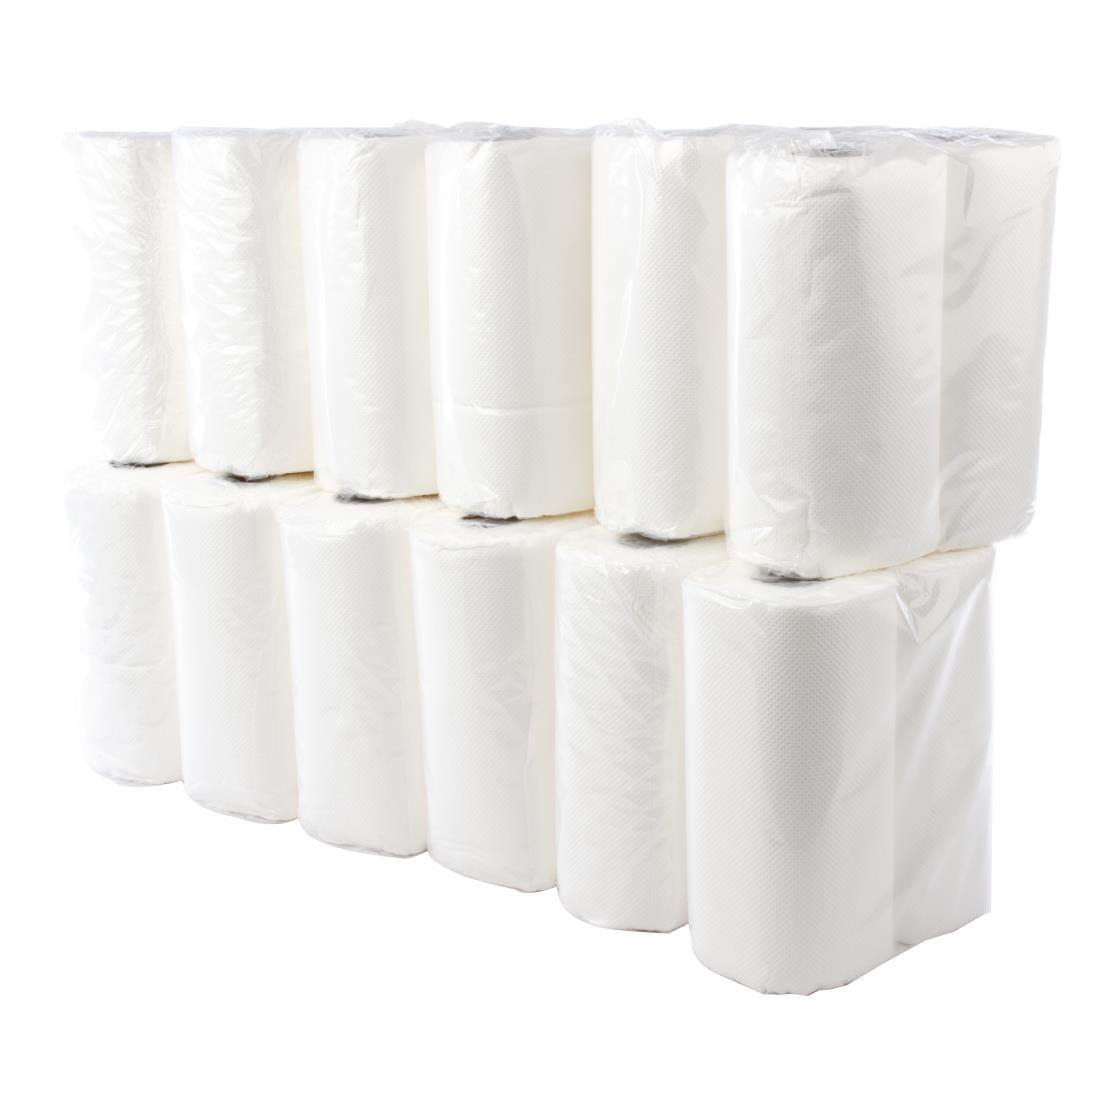 Jantex Kitchen Rolls White 2-Ply 11.5m (Pack of 24) - GH065  - 1